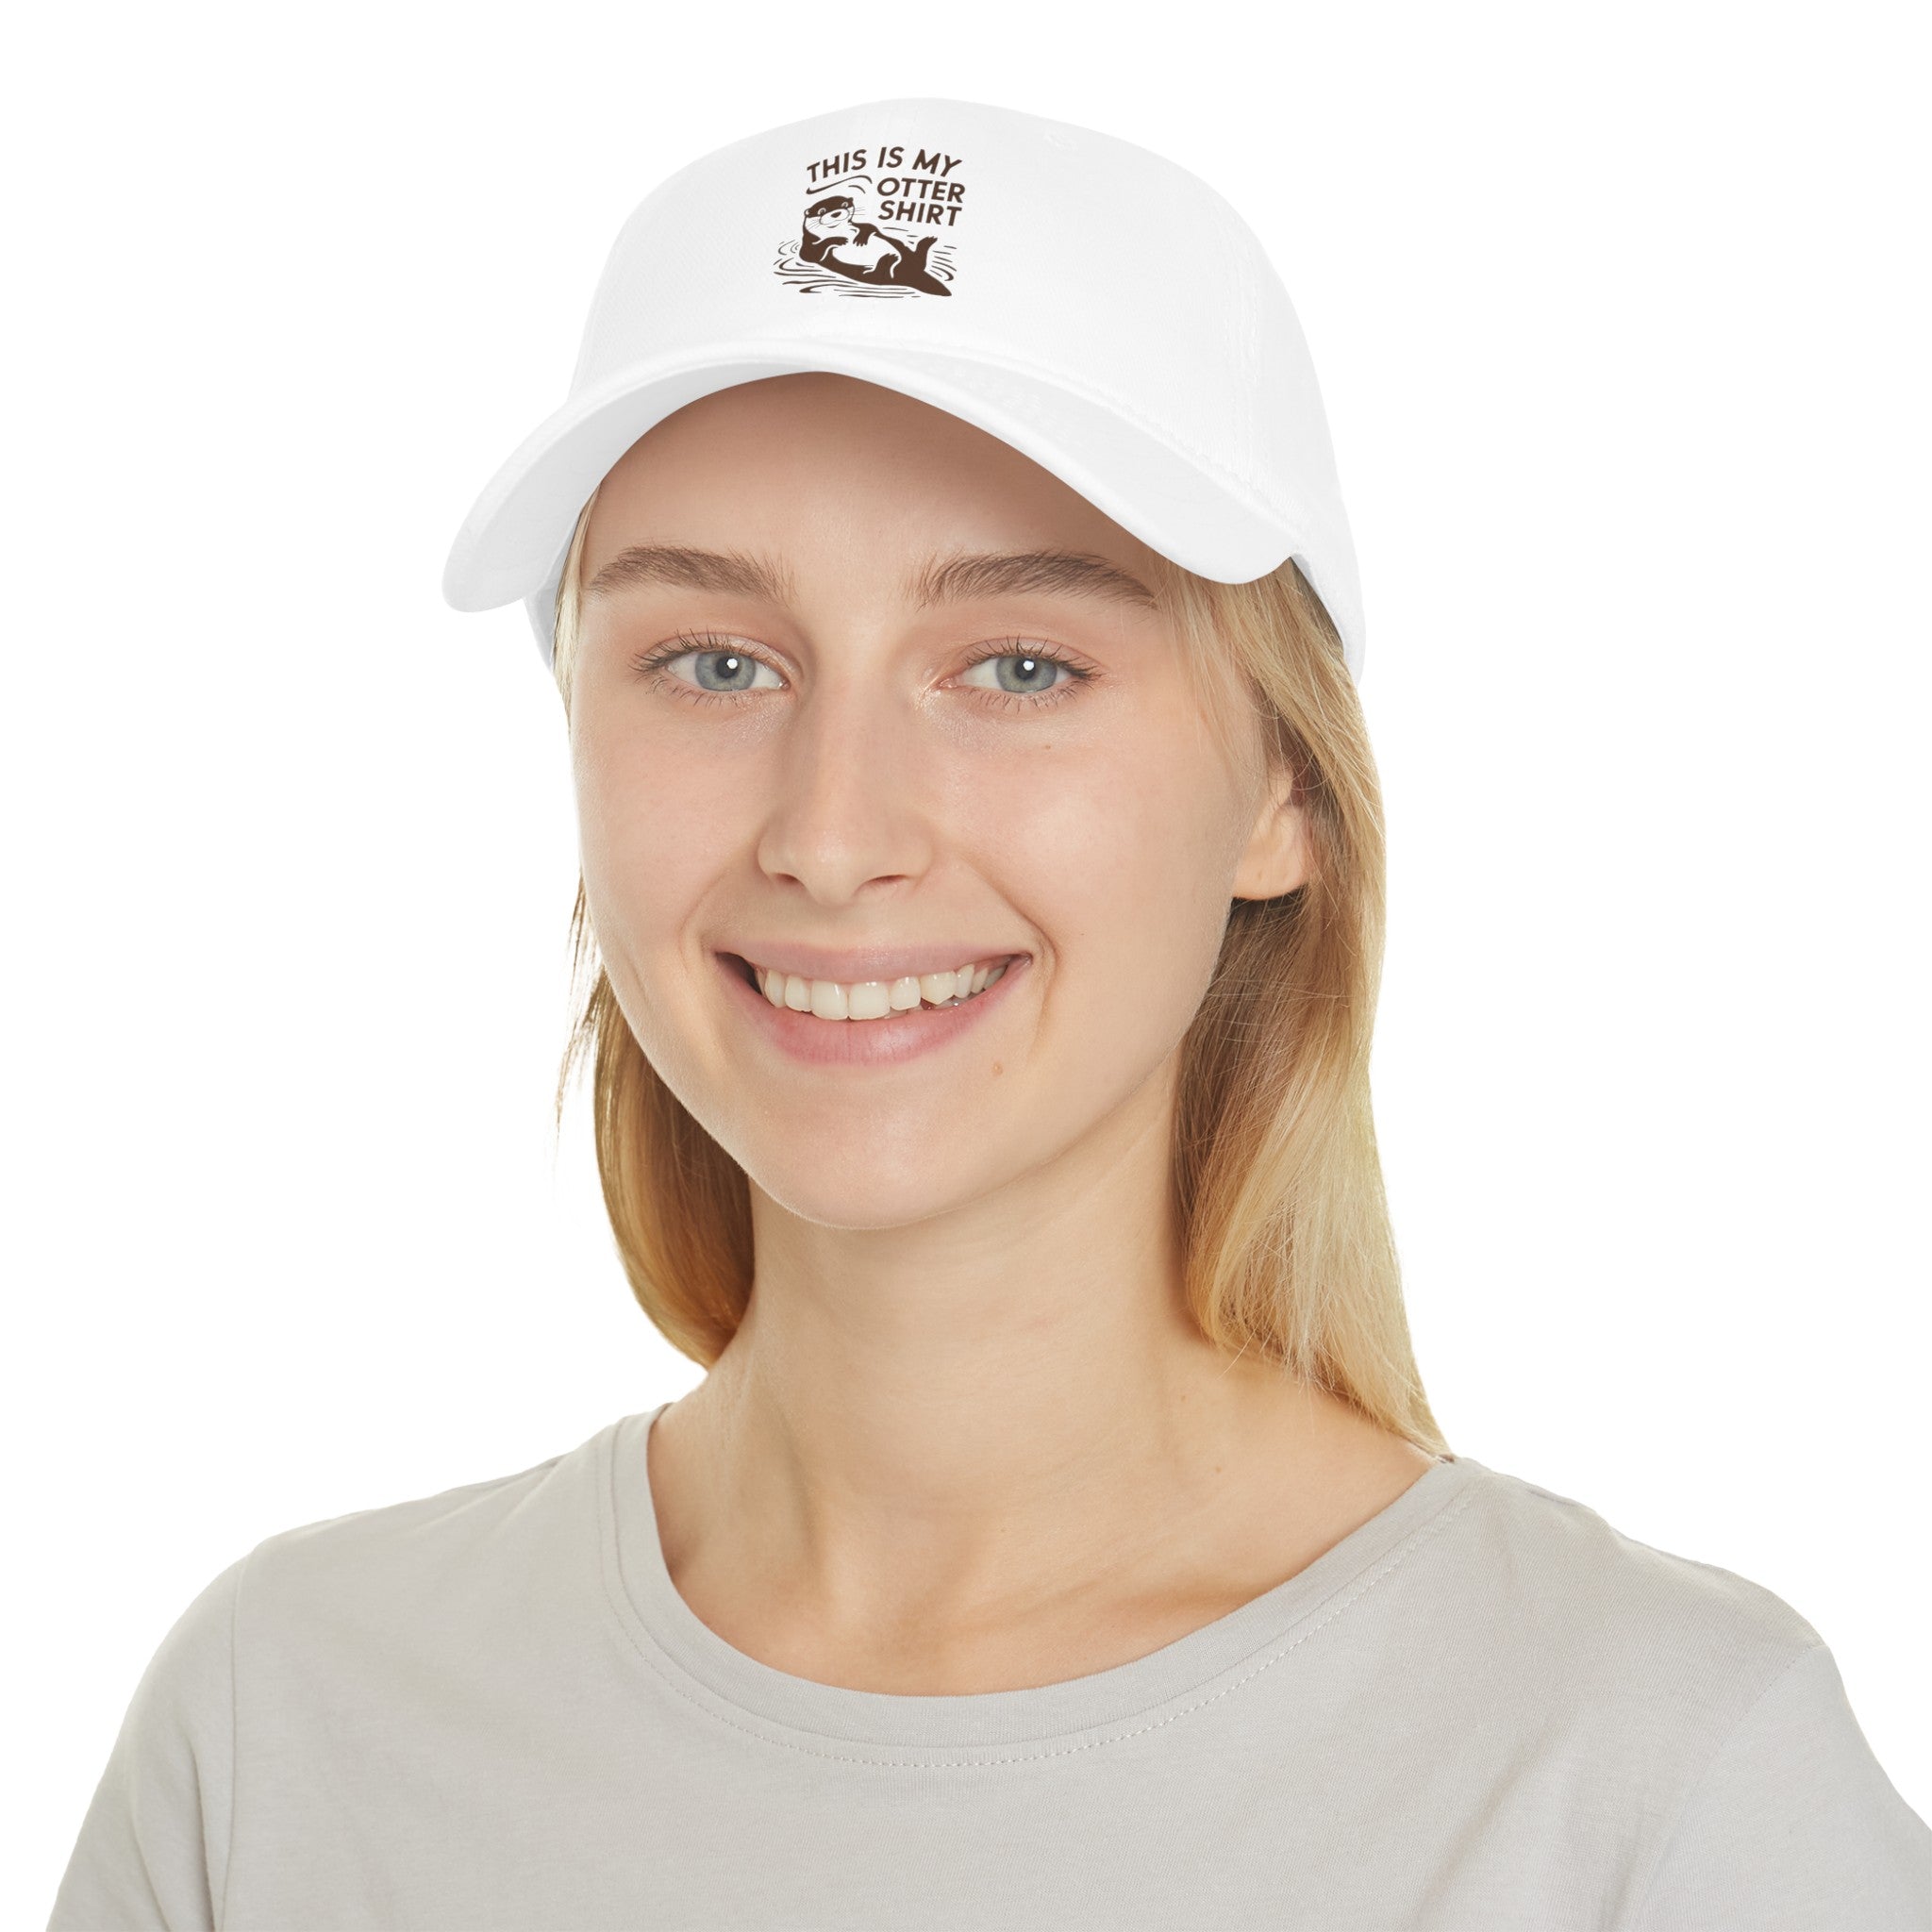 A person with long blonde hair smiles while wearing a white baseball cap, showcasing their unique style with an illustration and text that reads, "My Otter Shirt - Hat." They are dressed in a light grey t-shirt, exuding exceptional comfort.